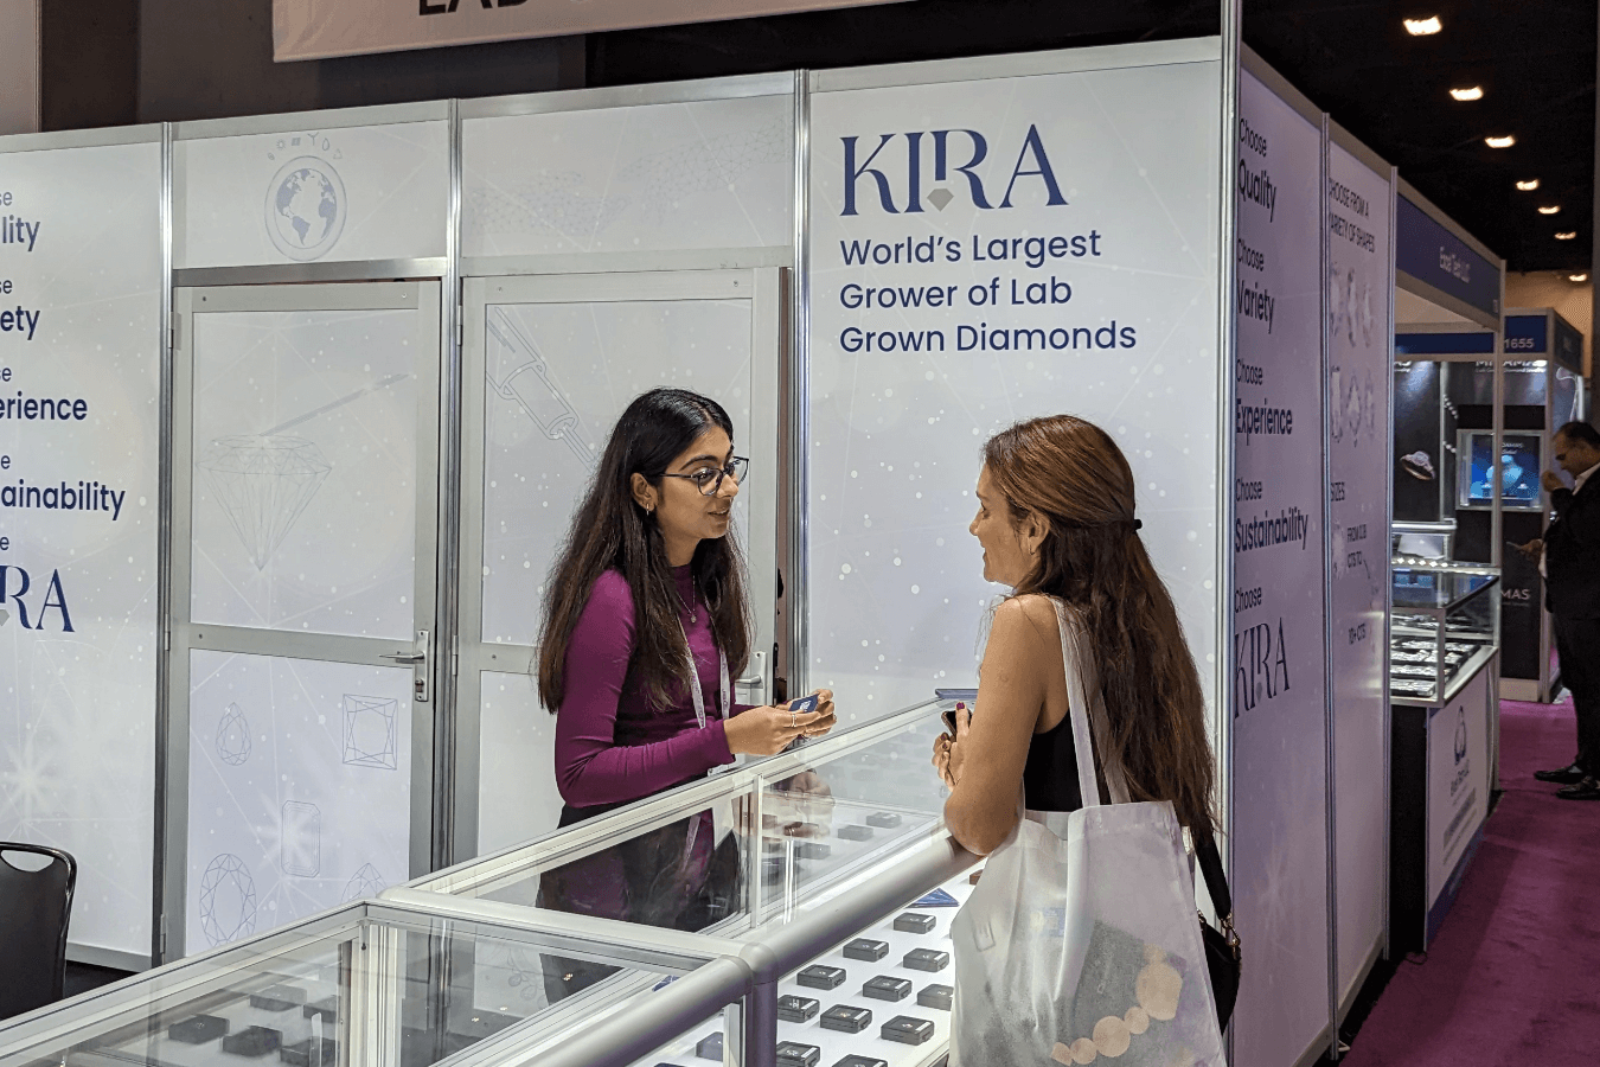 Visitors at Kira's Exhibition Booth